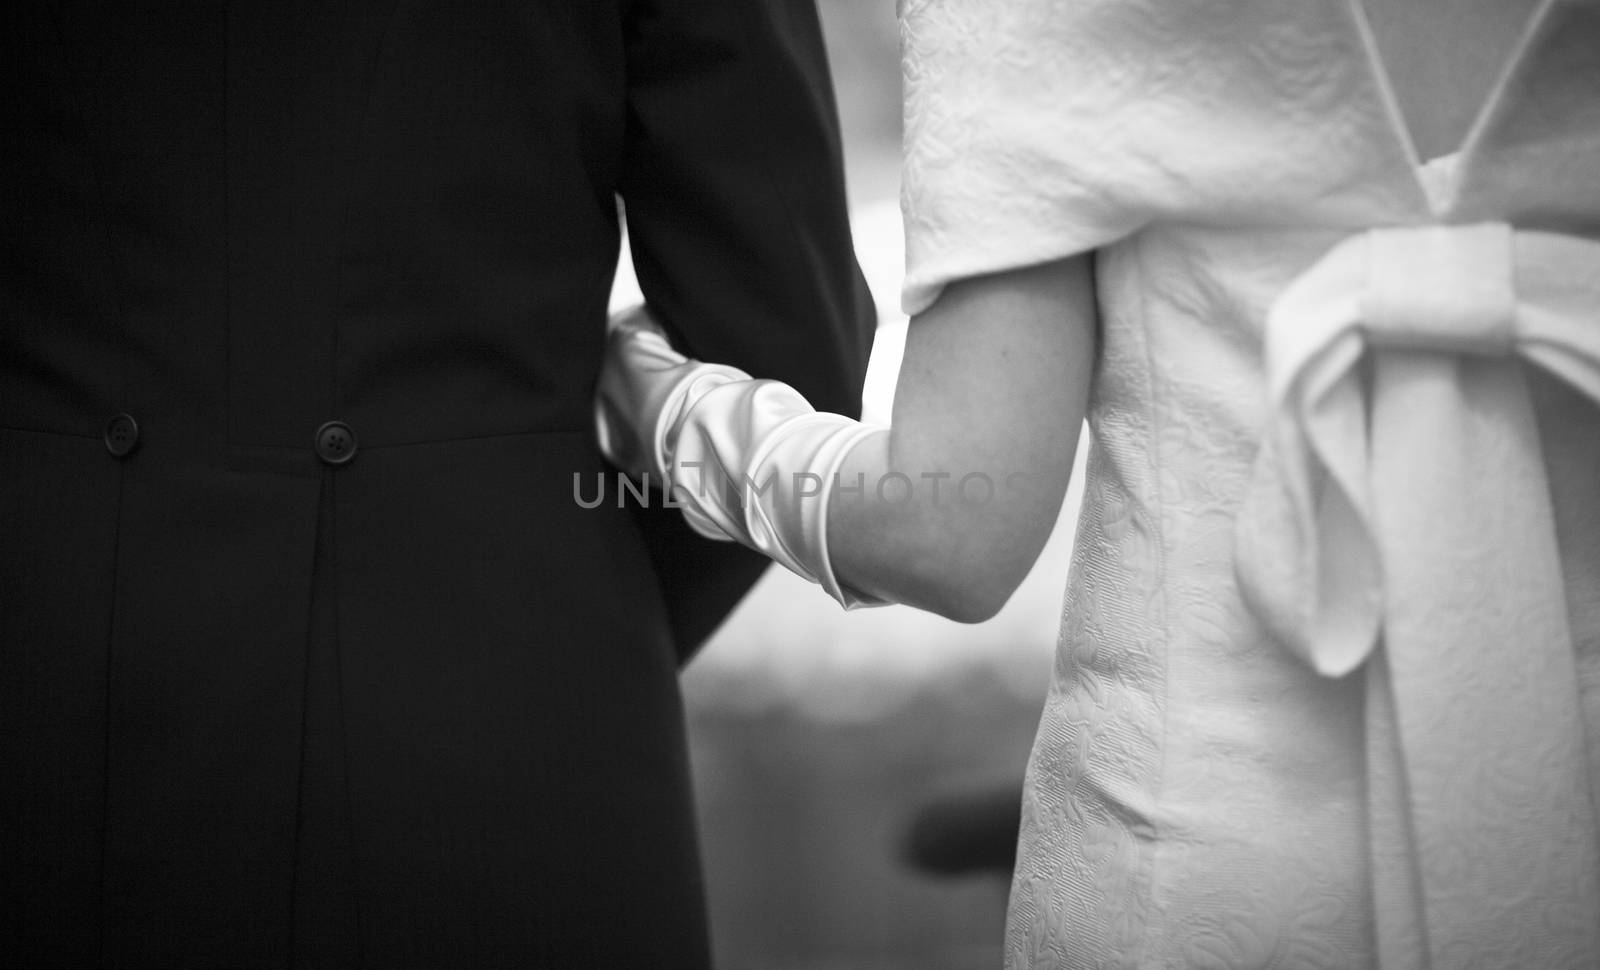 Bride and bridegroom in wedding marriage holding hands by edwardolive